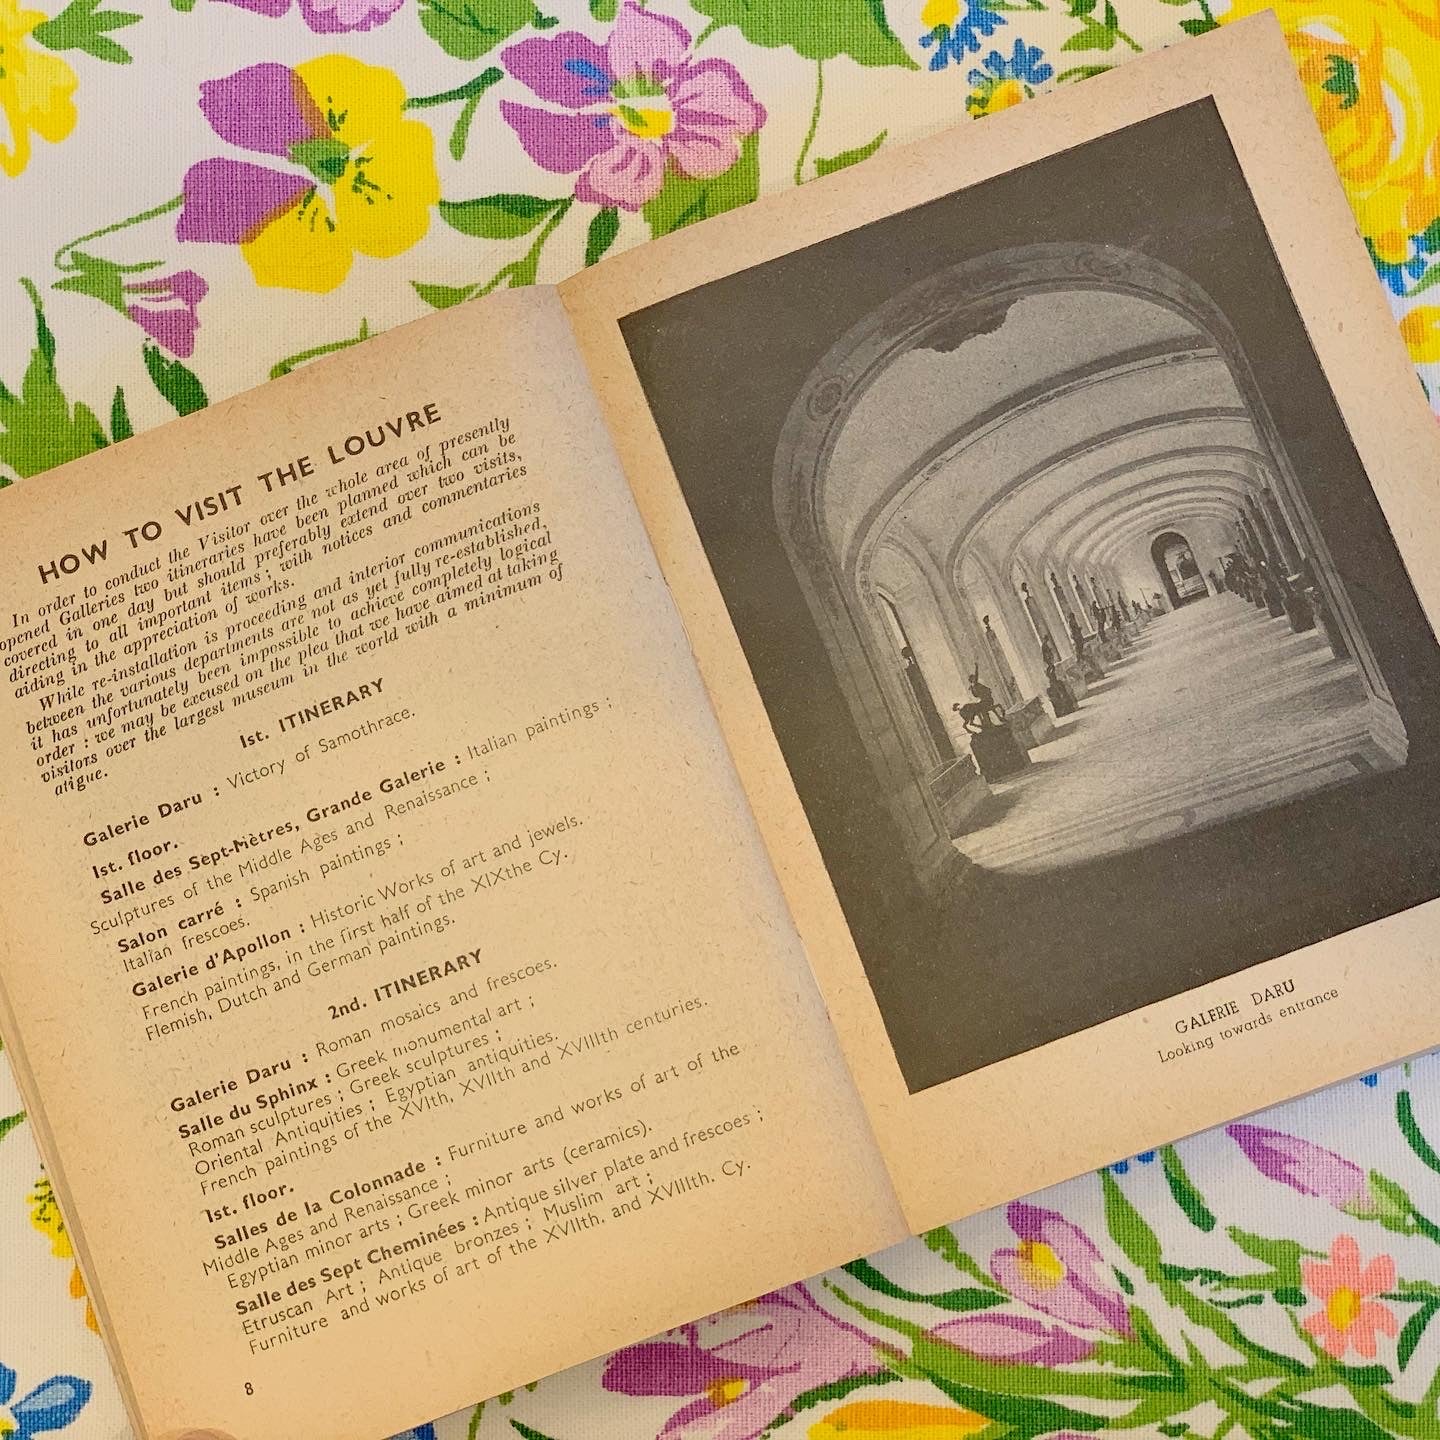 1948 Guide to The Louvre in Paris, France